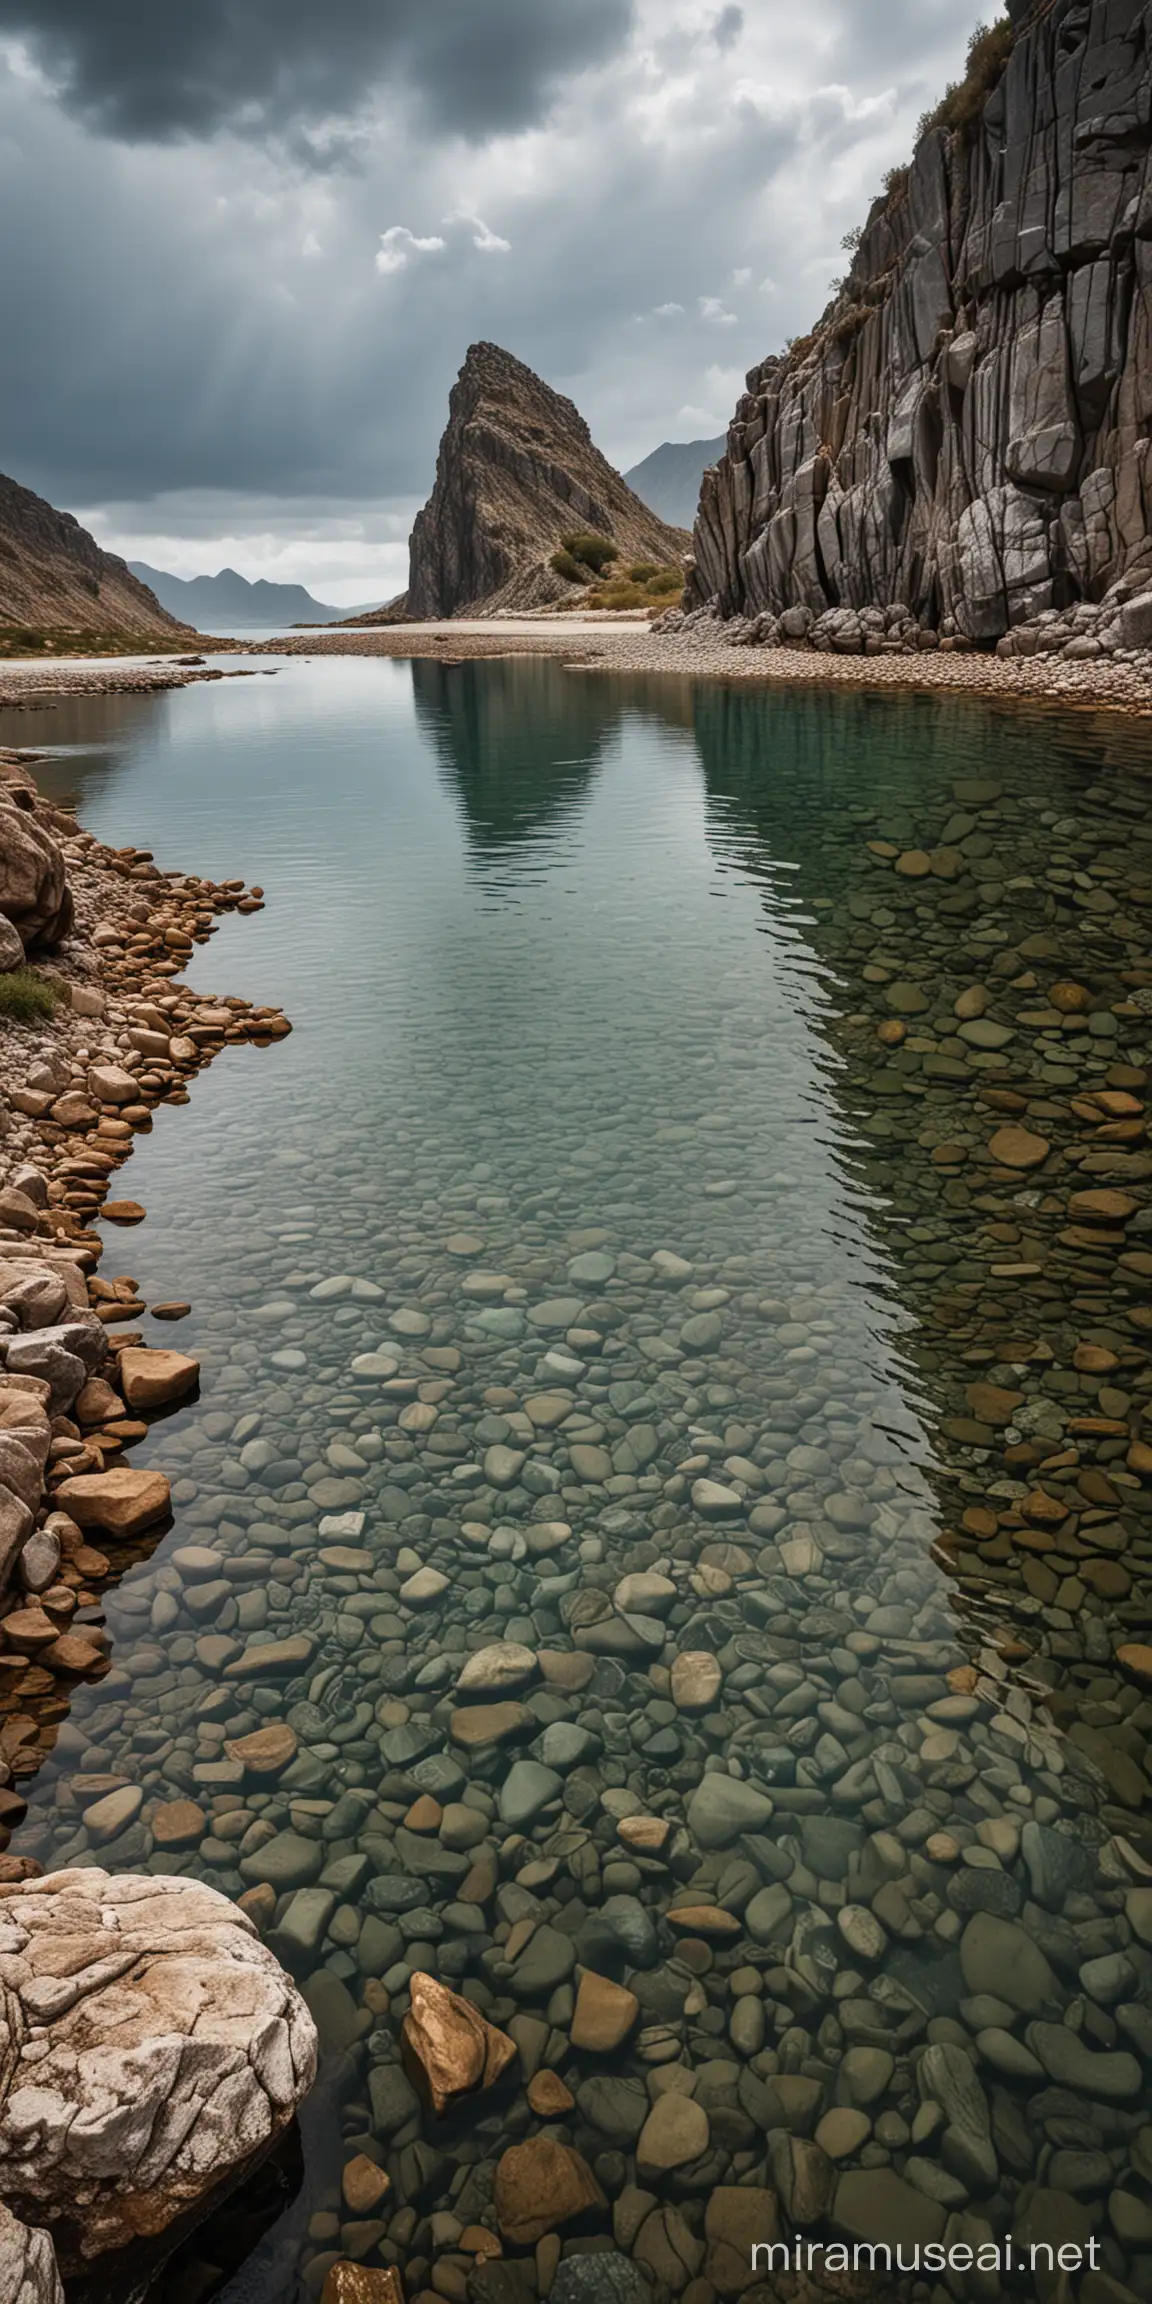 A landscape image in which there is both solidity and life, rock and water